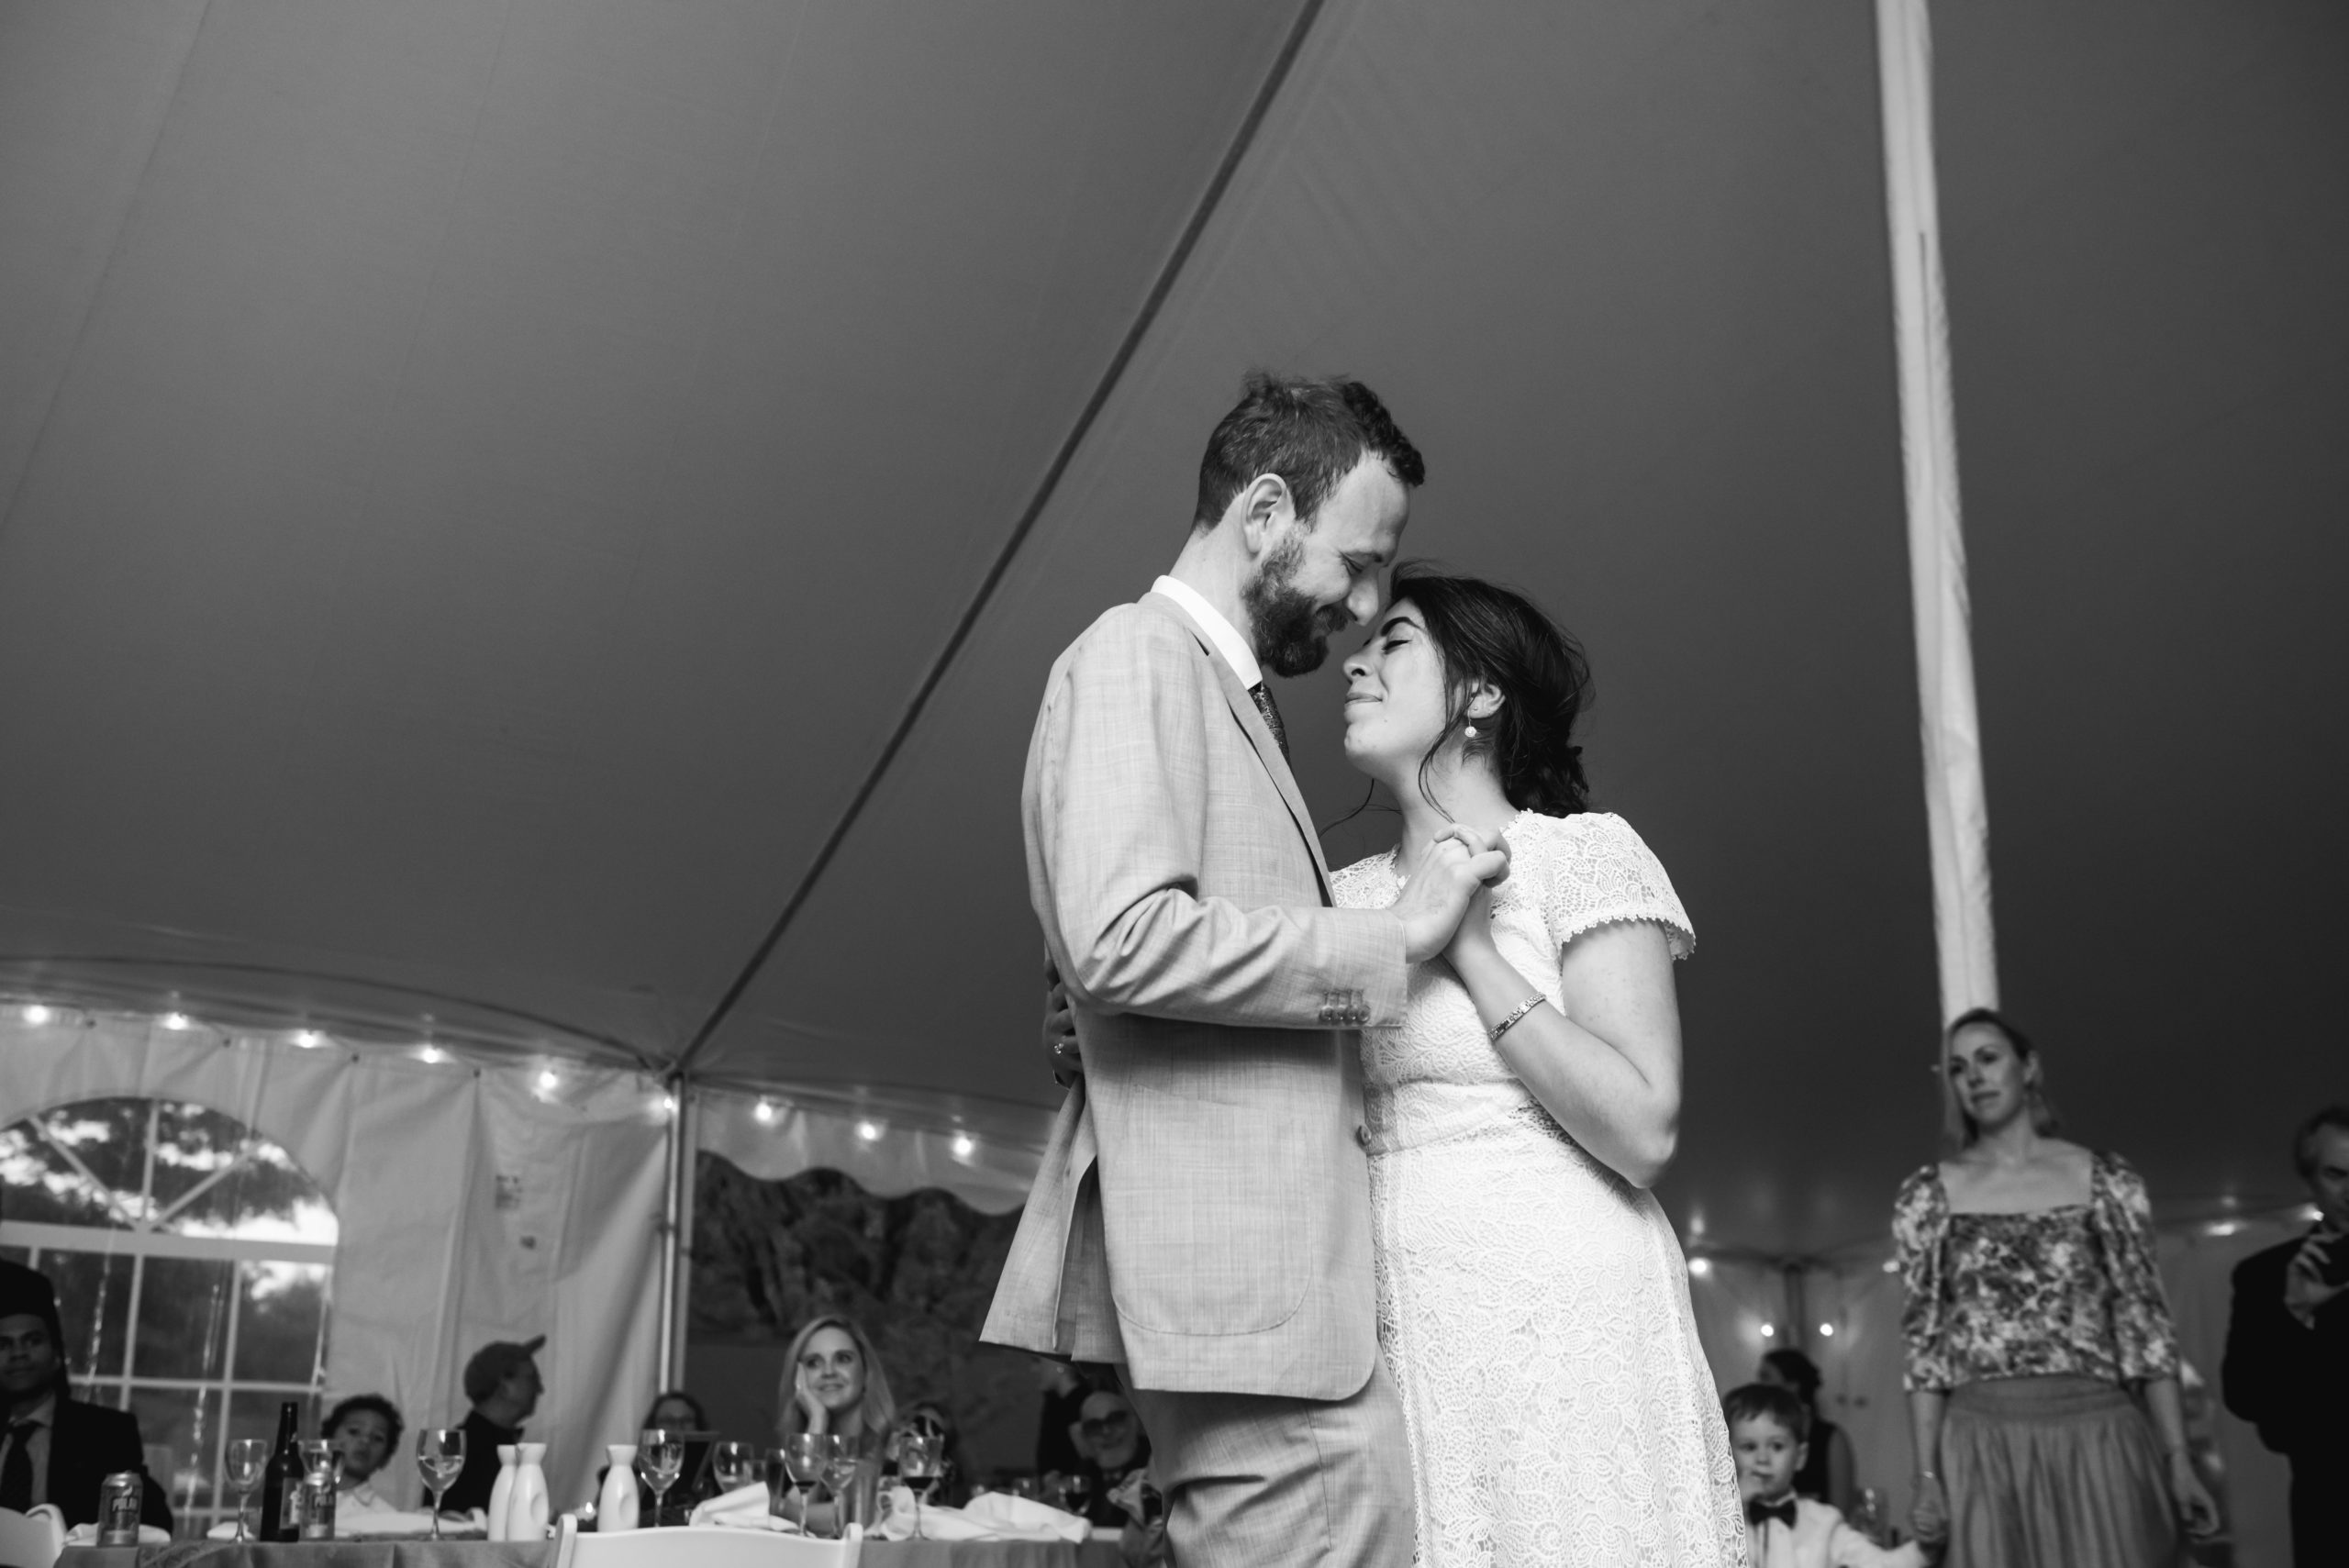 Black and white photo of the couple slow dancing during their reception. They are embracing face to face with the arms around each other and holding hands. Both have their eyes closed and have soft smiles in a tender moment. There are wedding guests in the background.